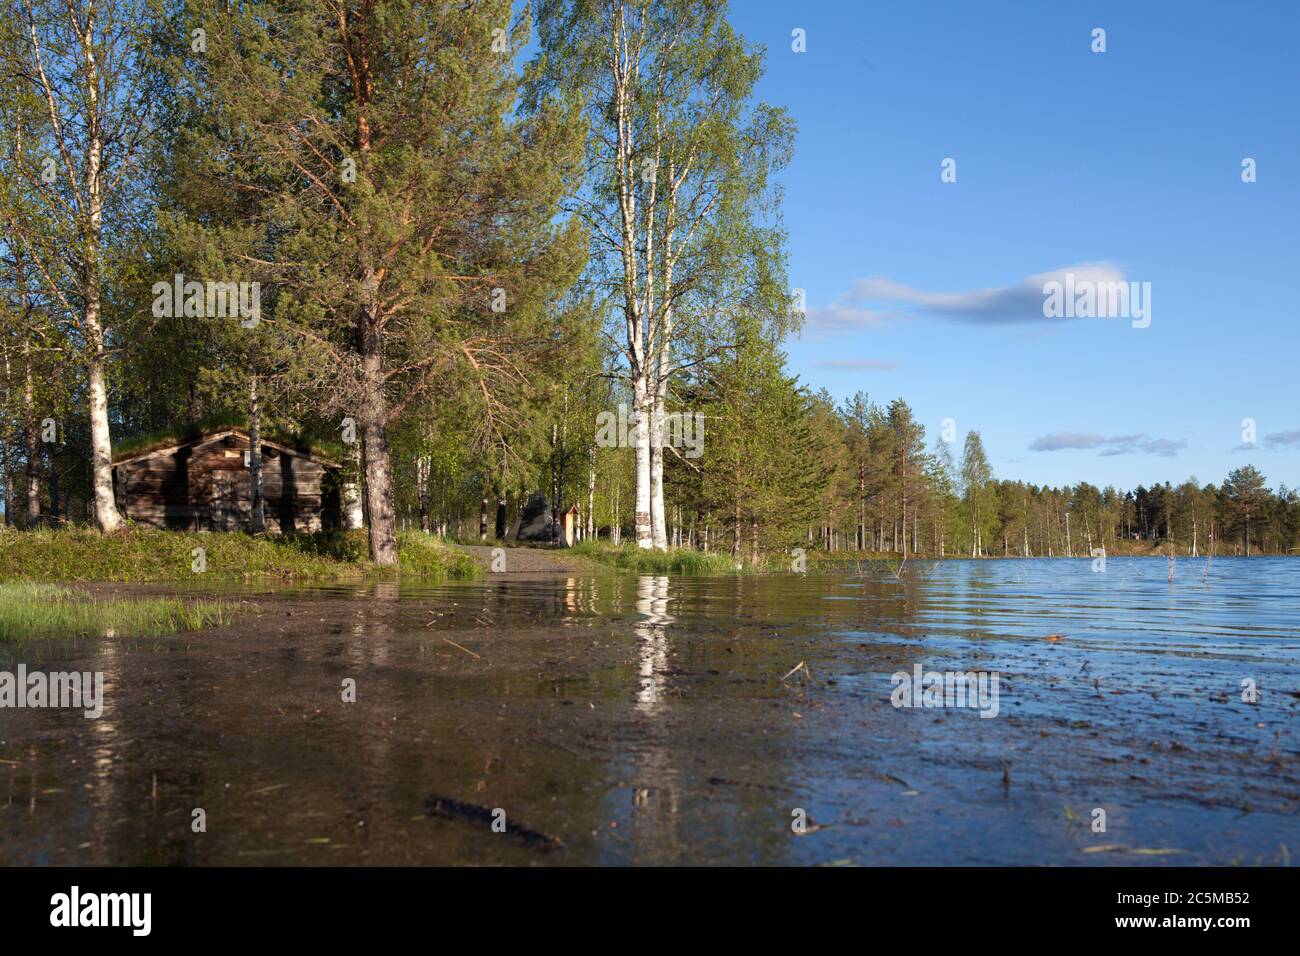 View of a flooded country road, forest in the background. Wooden barn in the wood. Sunshine. Stock Photo